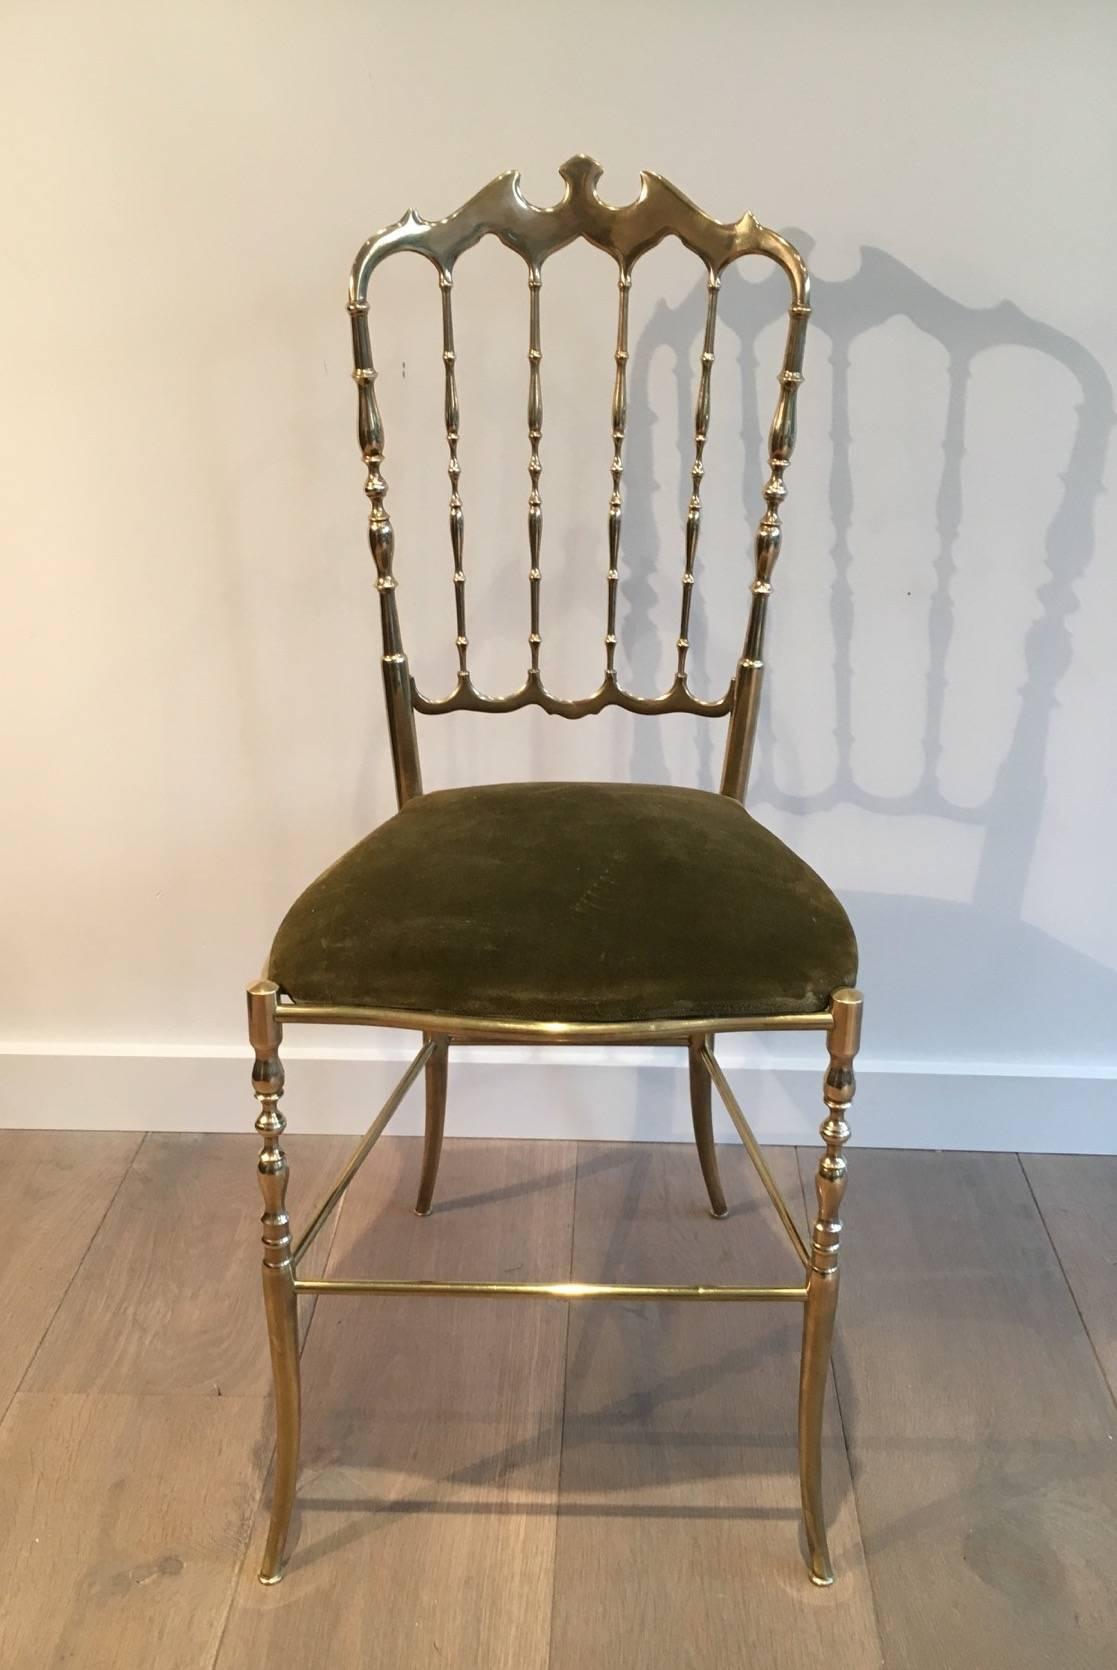 A solid brass side chair designed by Charivari brass with an upholstered seating green velvet, French, circa 1940

This chair is currently in France, please allow 4 to 6 weeks for delivery.